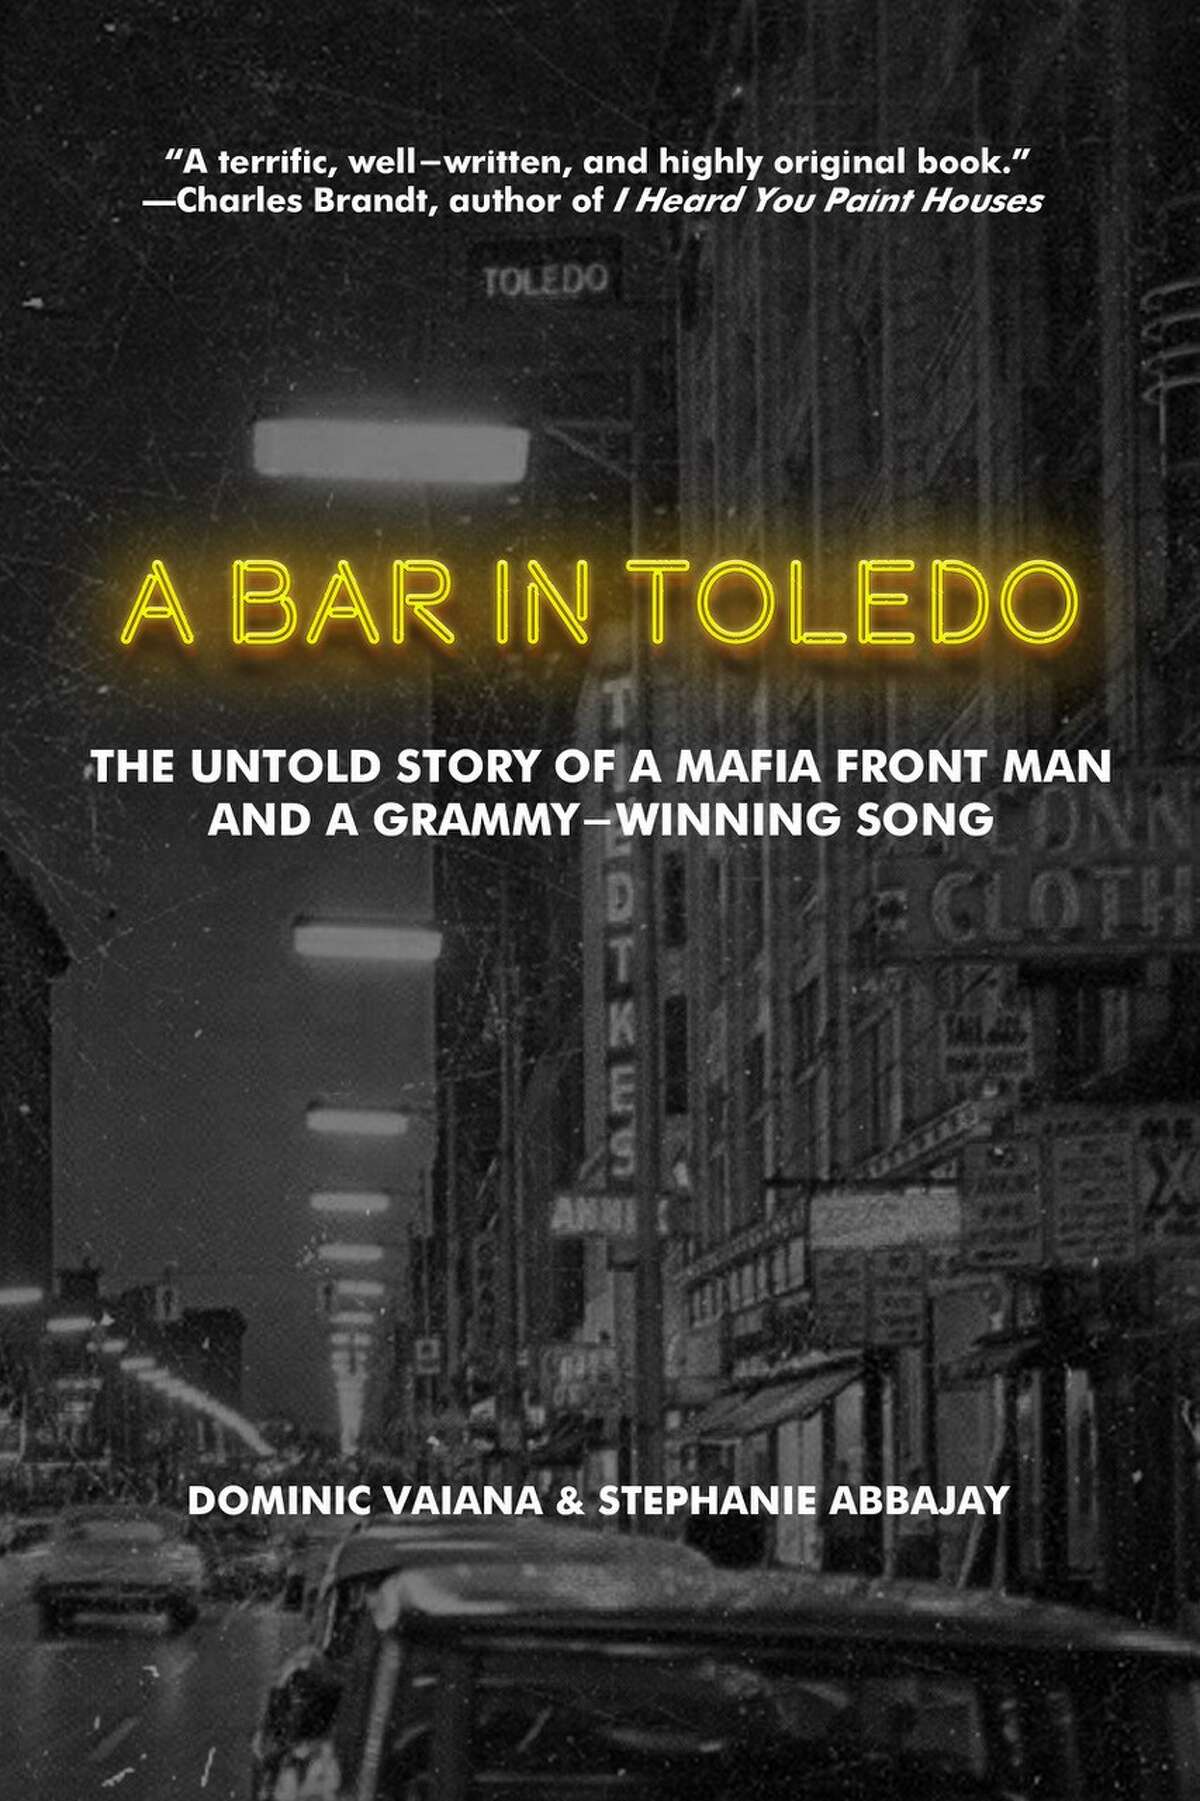  "A Bar in Toledo," by Stephanie Abbajay, published last September by the University of Toledo Press, tells the story of Duane Abbajay when he took over his brother’s bankrupt nightclub in downtown Toledo, Ohio, in 1962.